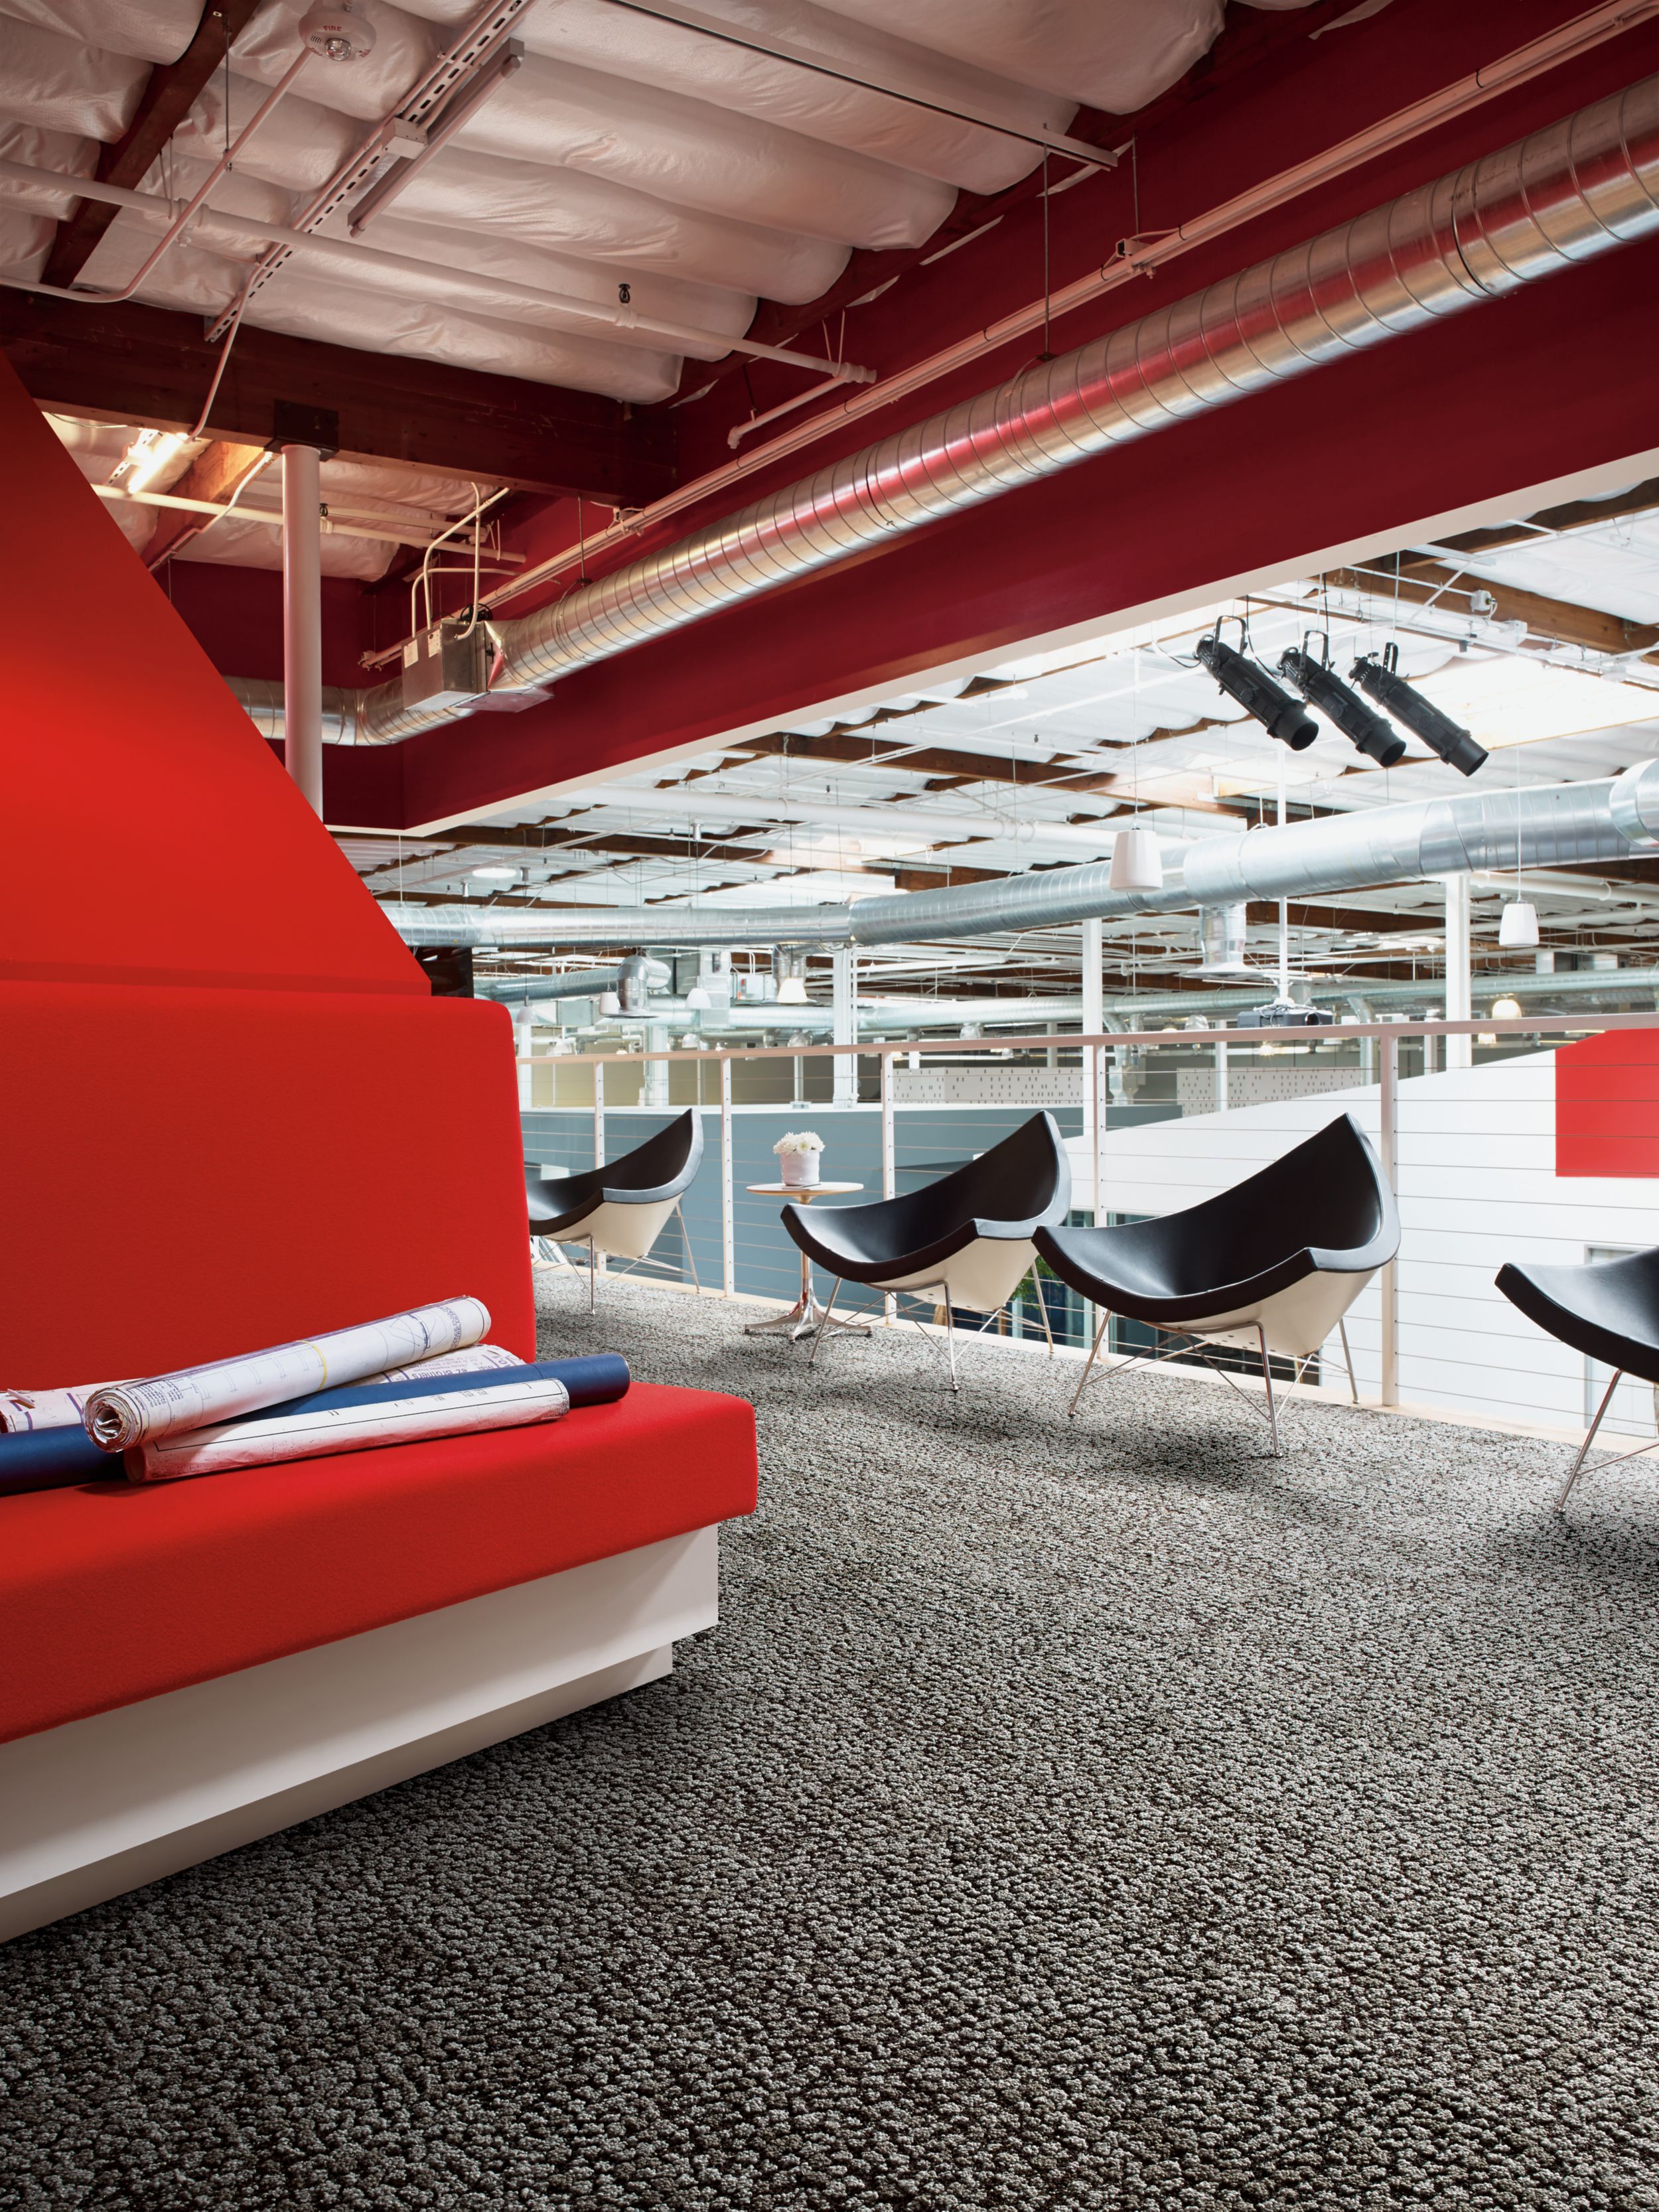 image Interface HN840 plank carpet tile in upper level open space with red bench and black chairs numéro 5